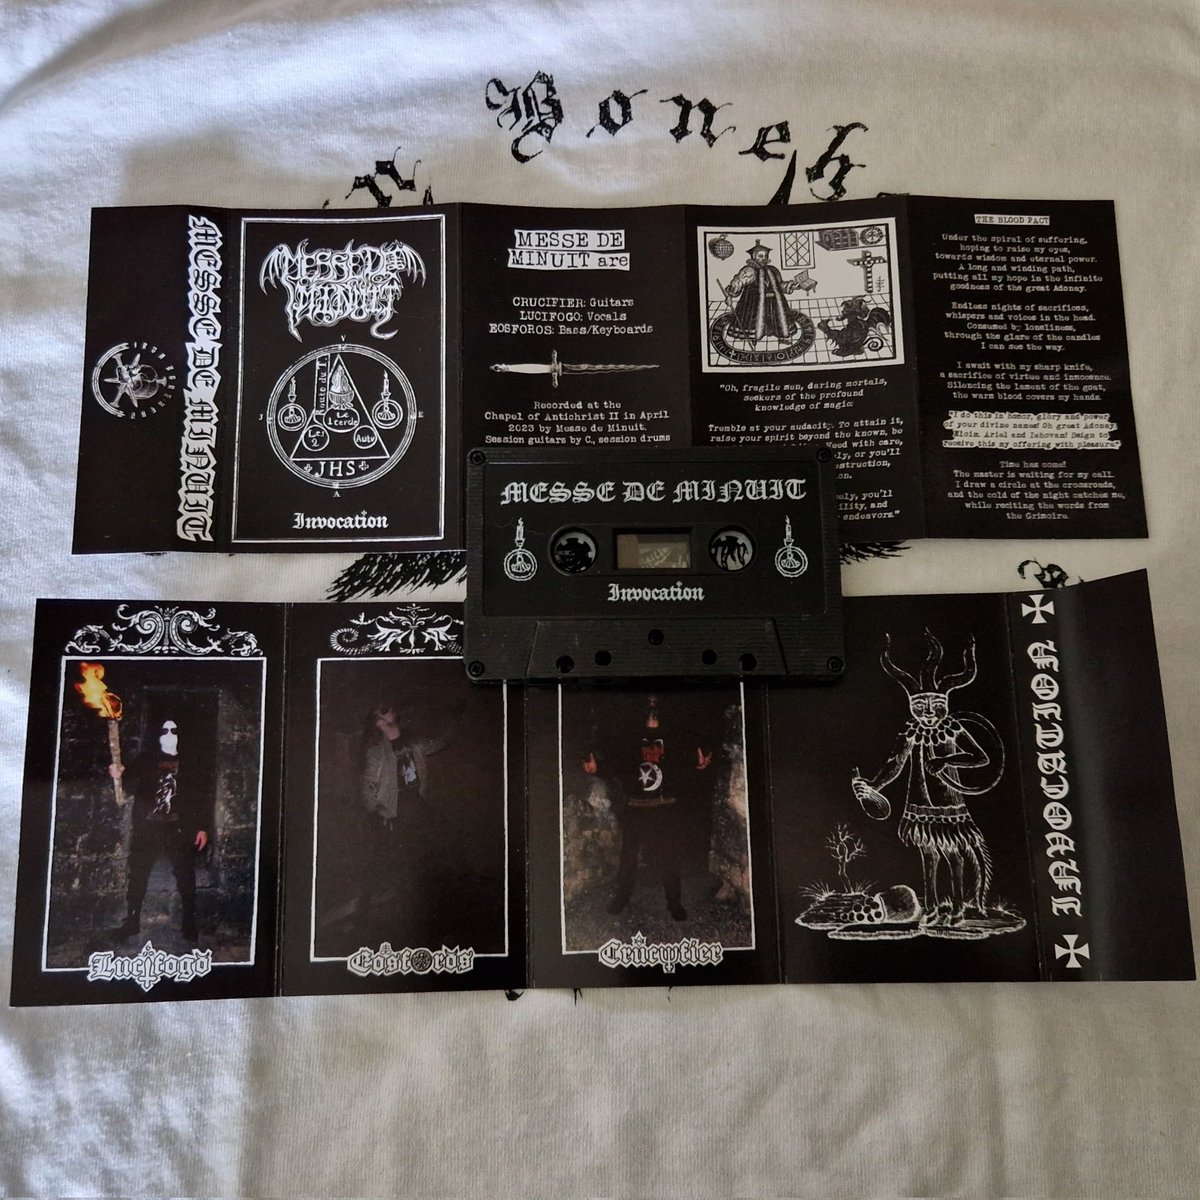 OUT NOW! MESSE DE MINUIT (Spain) 'Invocation' Tape - Black tape with white onbody print - 8 panel J-Card - Limited to 100 copies Sound: ironboneheadproductions.bandcamp.com/album/messe-de… Order: shop.ironbonehead.de